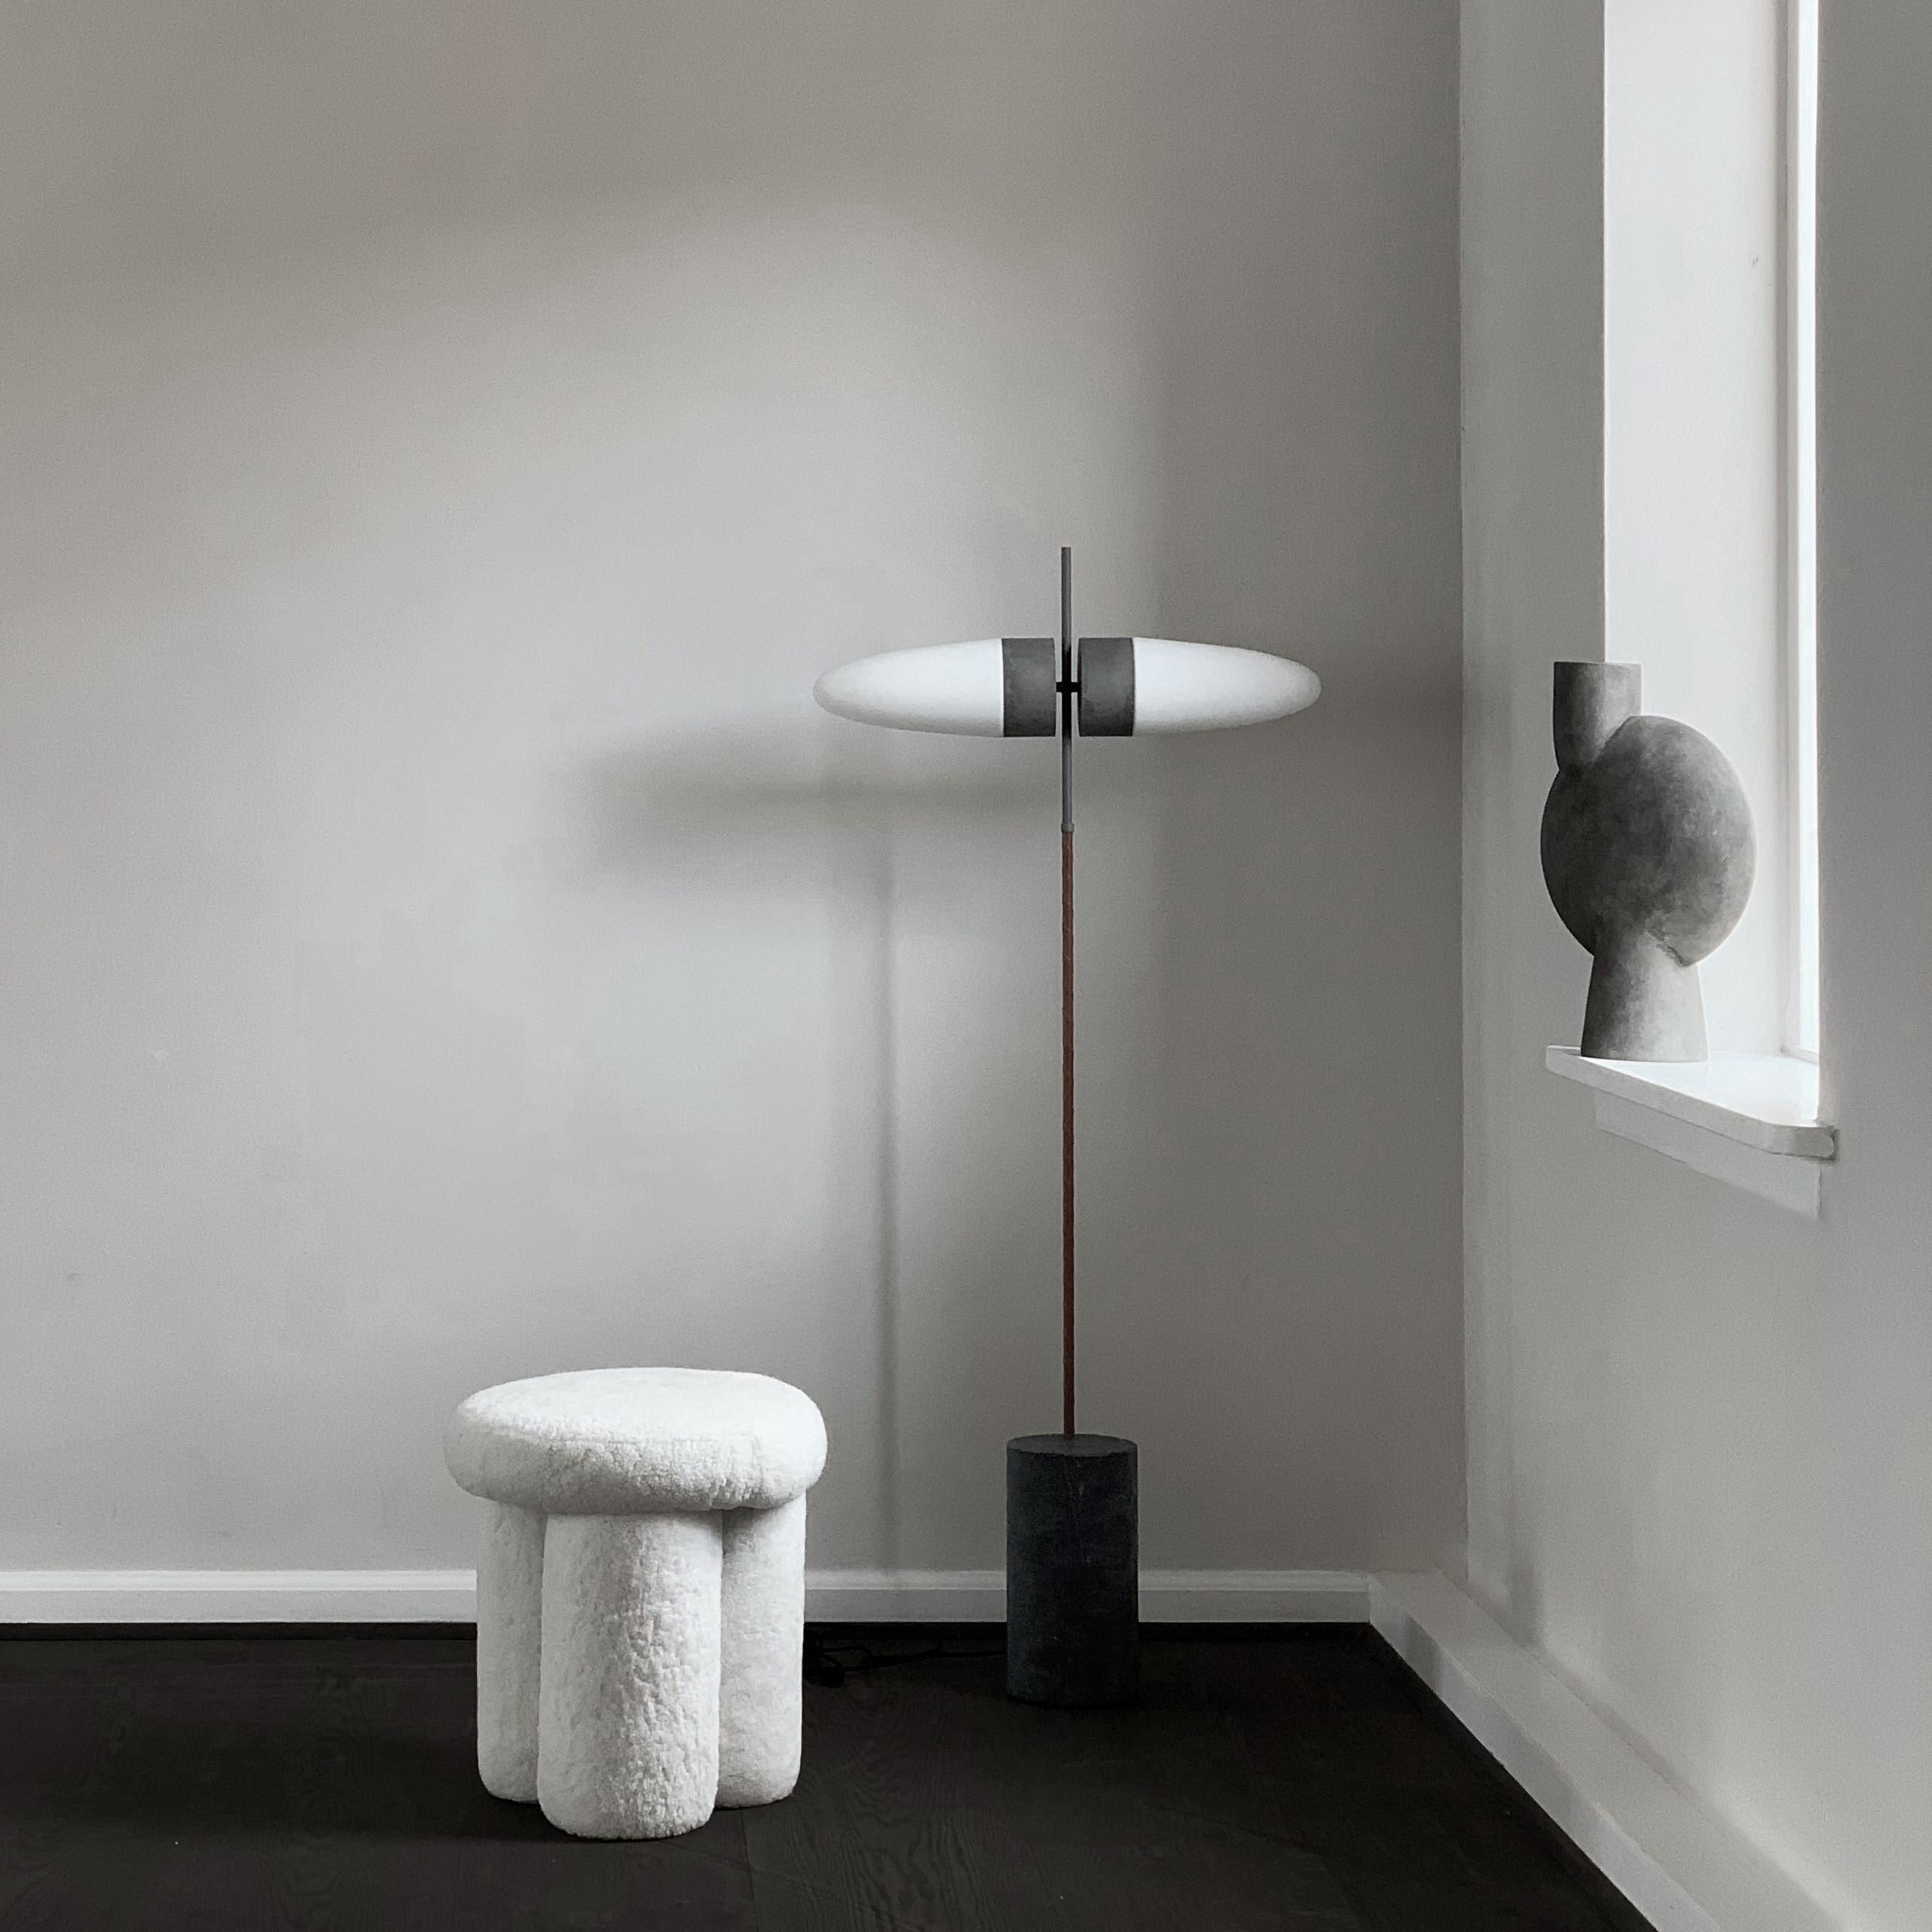 Bull floor lamp by 101 Copenhagen
Designed by Kristian Sofus Hansen & Tommy Hyldahl.
Dimensions: L 65 x W 16 x H 140 cm
Cable length: 200 cm

Materials: metal: aluminum / oxidized
Opal glass / white
Leather / cognac
Cable: fabric covered